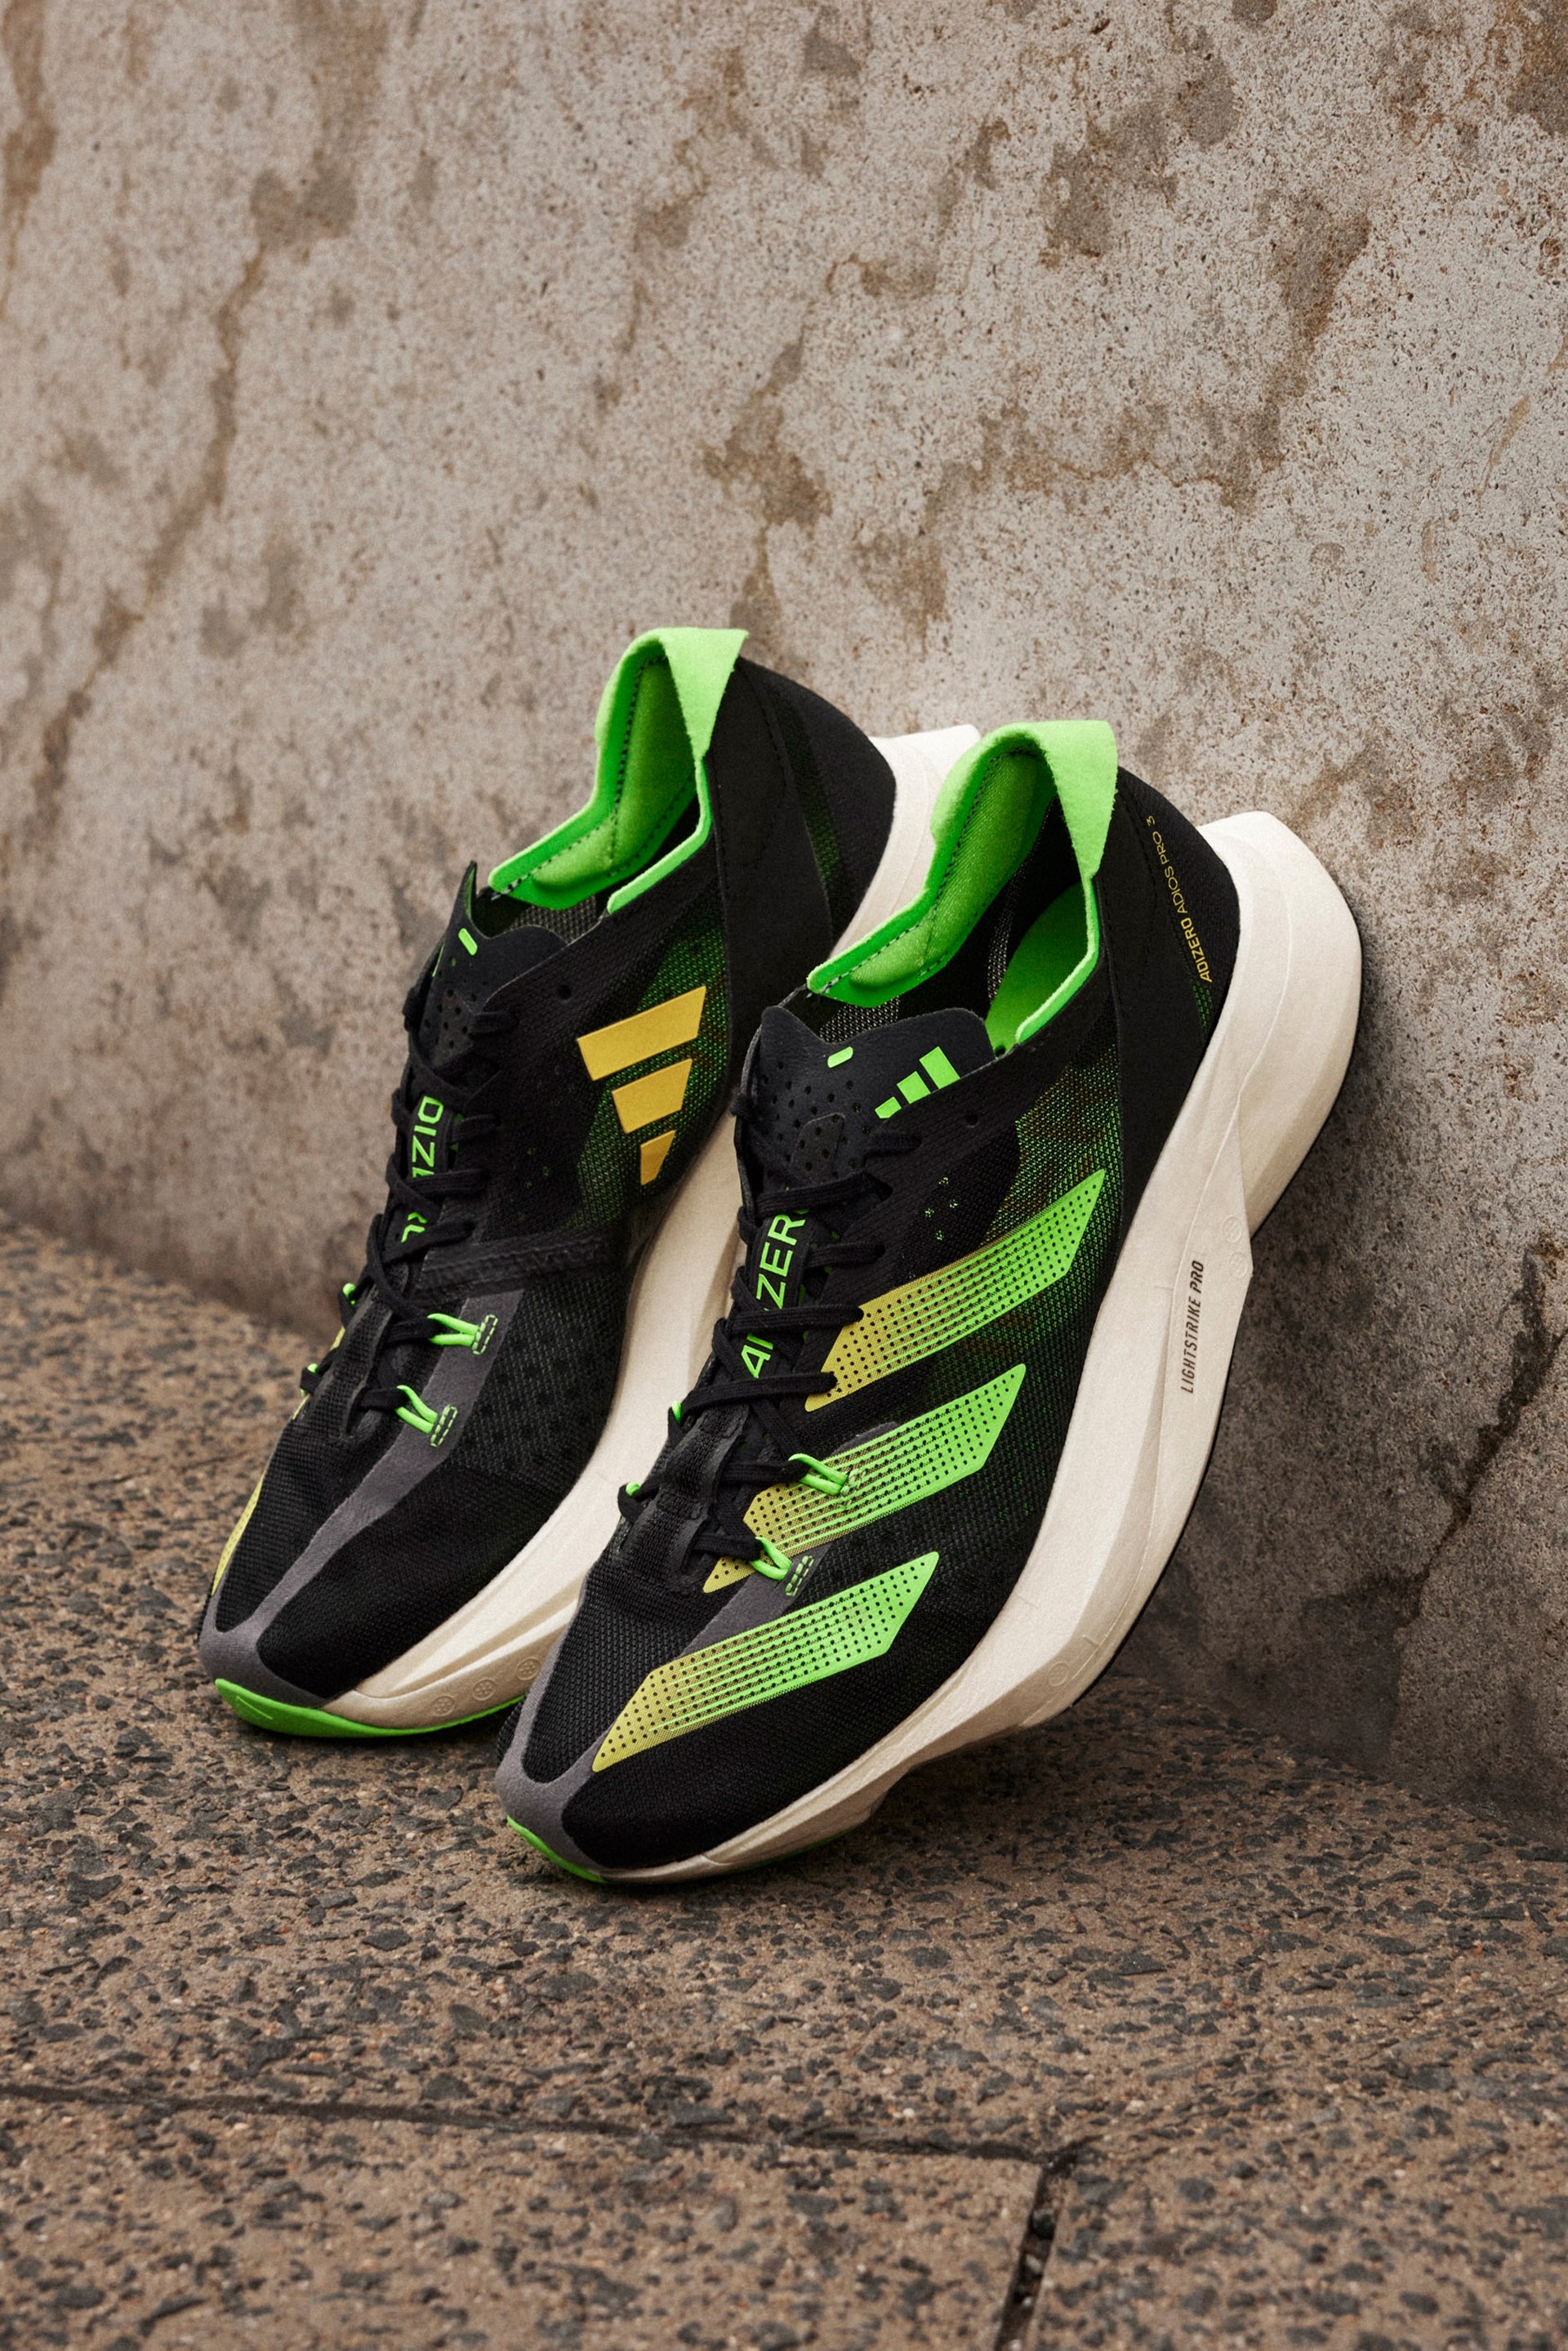 adidas News Site | Press Resources for all Brands, Sports and